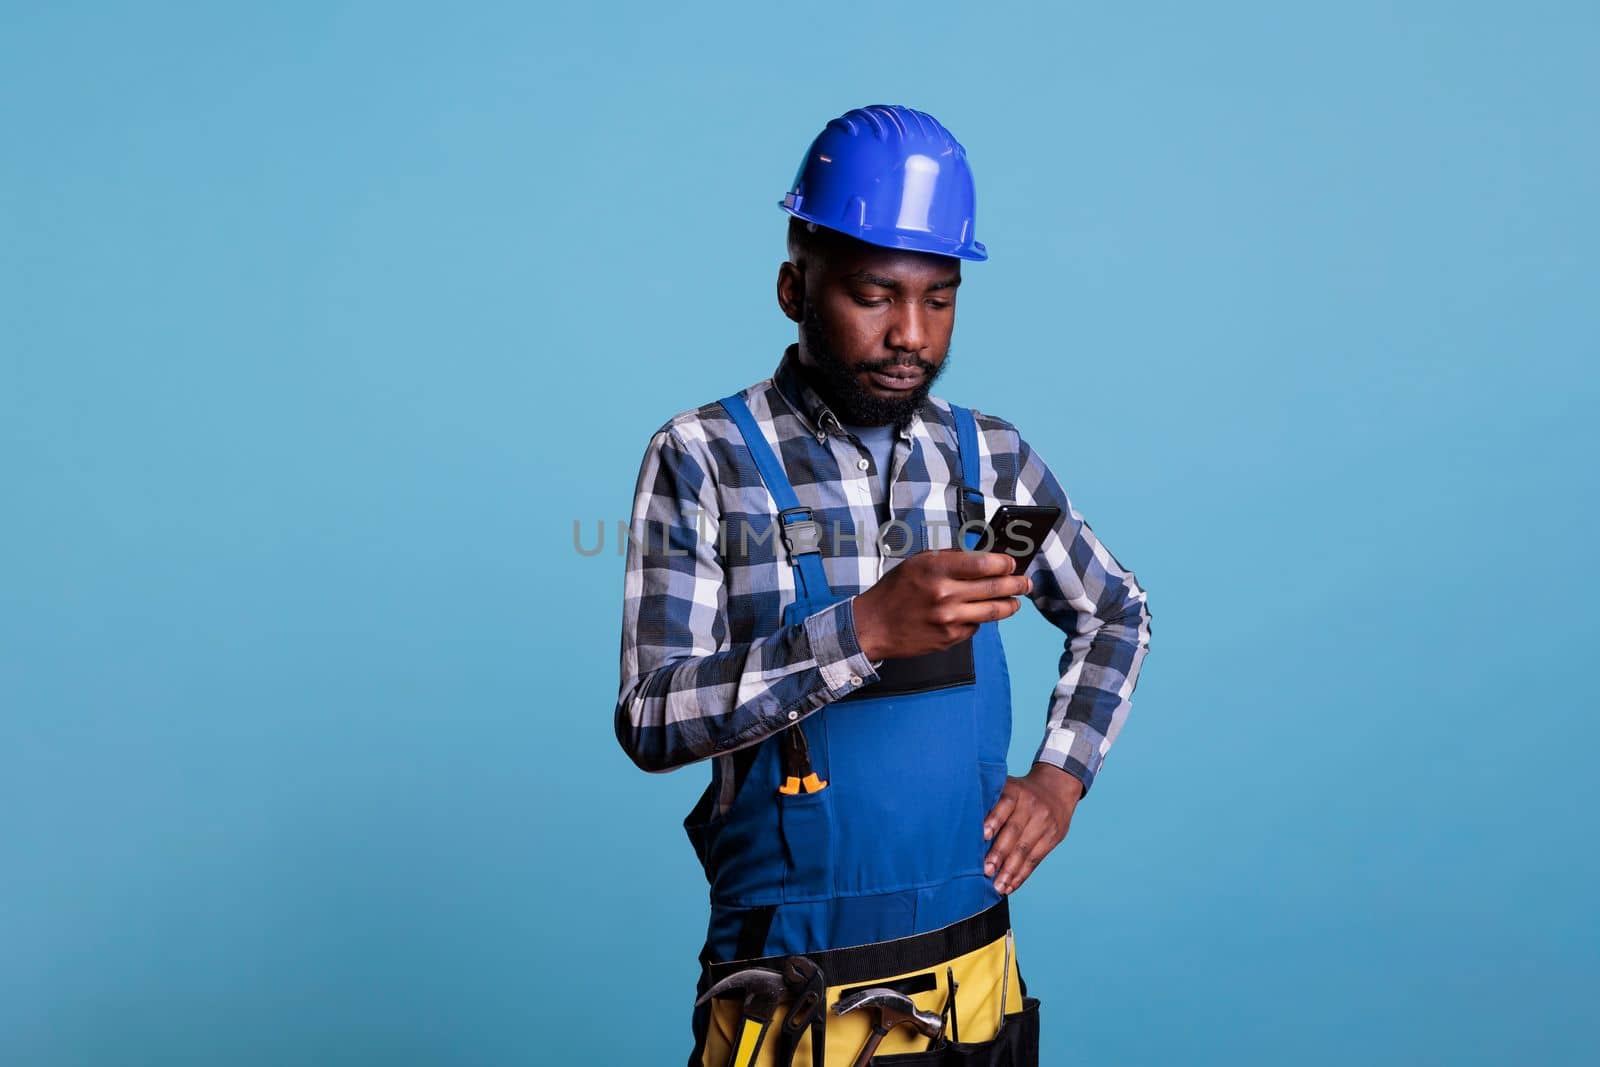 Distracted african american construction worker using cell phone in studio shot against blue background. Contractor wearing work uniform and hard hat while texting with mobile device.